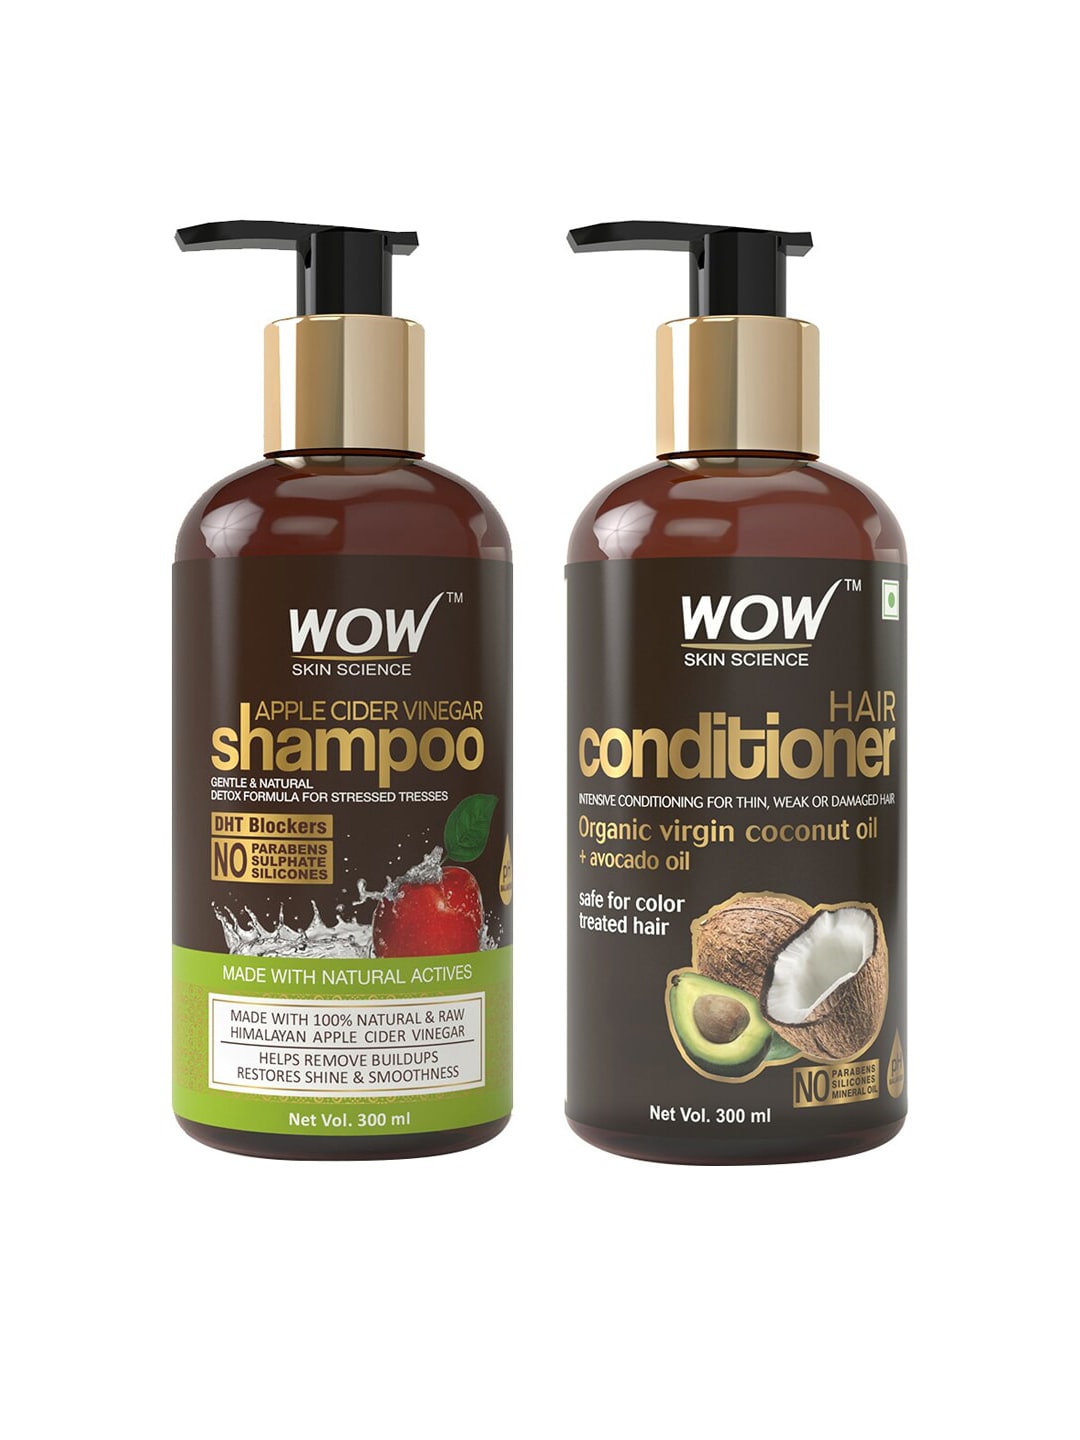 WOW SKIN SCIENCE Unisex Set of ACV Shampoo & Coconut + Avocado Oil  Conditioner -600 ml Price in India, Full Specifications & Offers |  